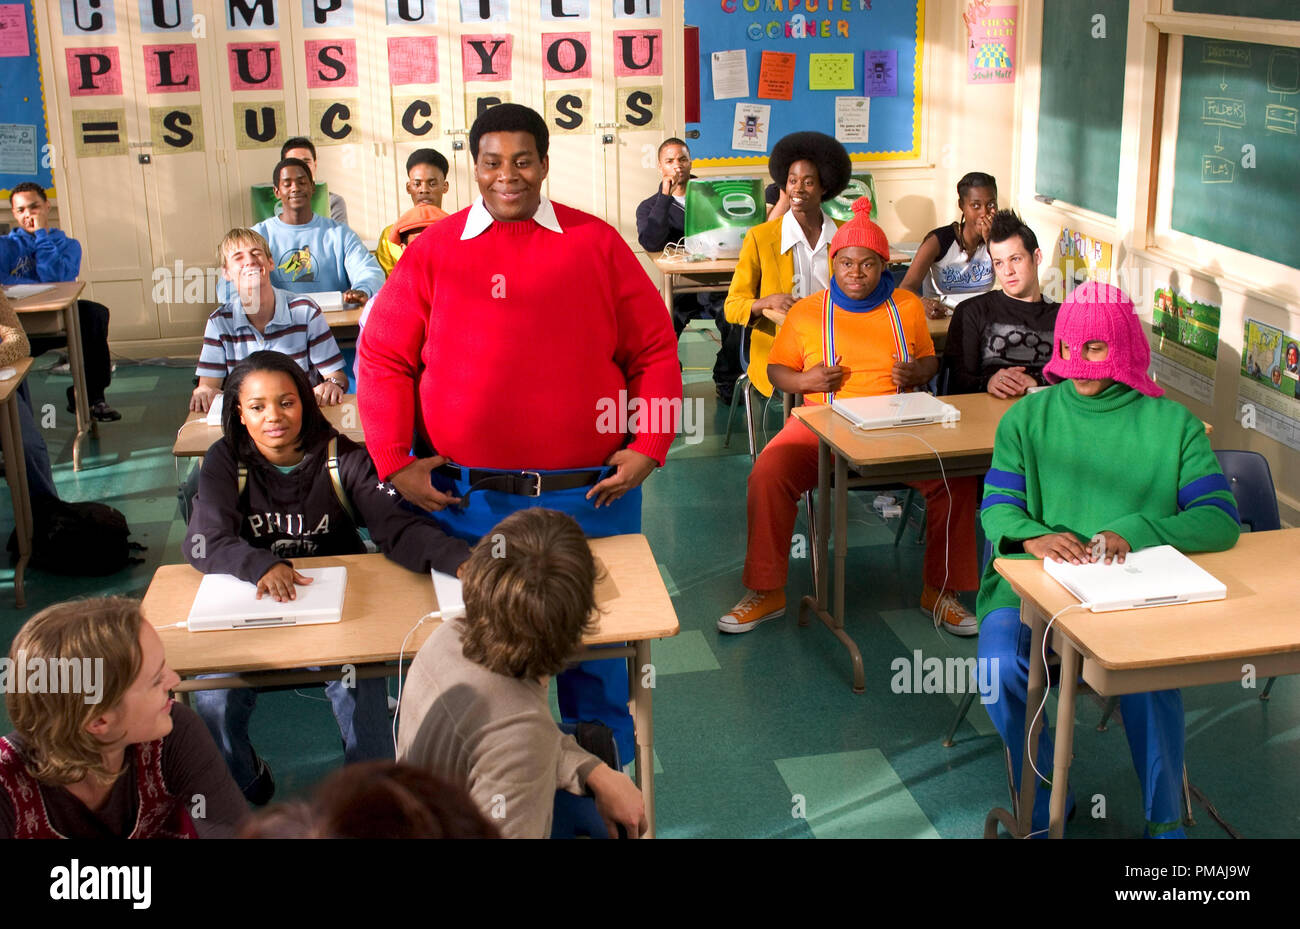 Doris (Kyla Pratt, seated left) brings her new friends, Fat Albert (Kenan Thompson) and the Cosby Kids to class with her.  Fat AlbertÕs pals are (back row, L-R) Bill (Keith D. Robinson), Bucky (Alphonso McAuley) and Old Weird Harold (Aaron A. Frazier).  In the middle row are schoolmates played by Aaron Carter (L) and Joel Madden (R) seated beside Mushmouth (Jermaine Williams, center).  Dumb Donald (Marques B. Houston) is seated in the front row on the right. 'Fat Albert' (2004) Stock Photo